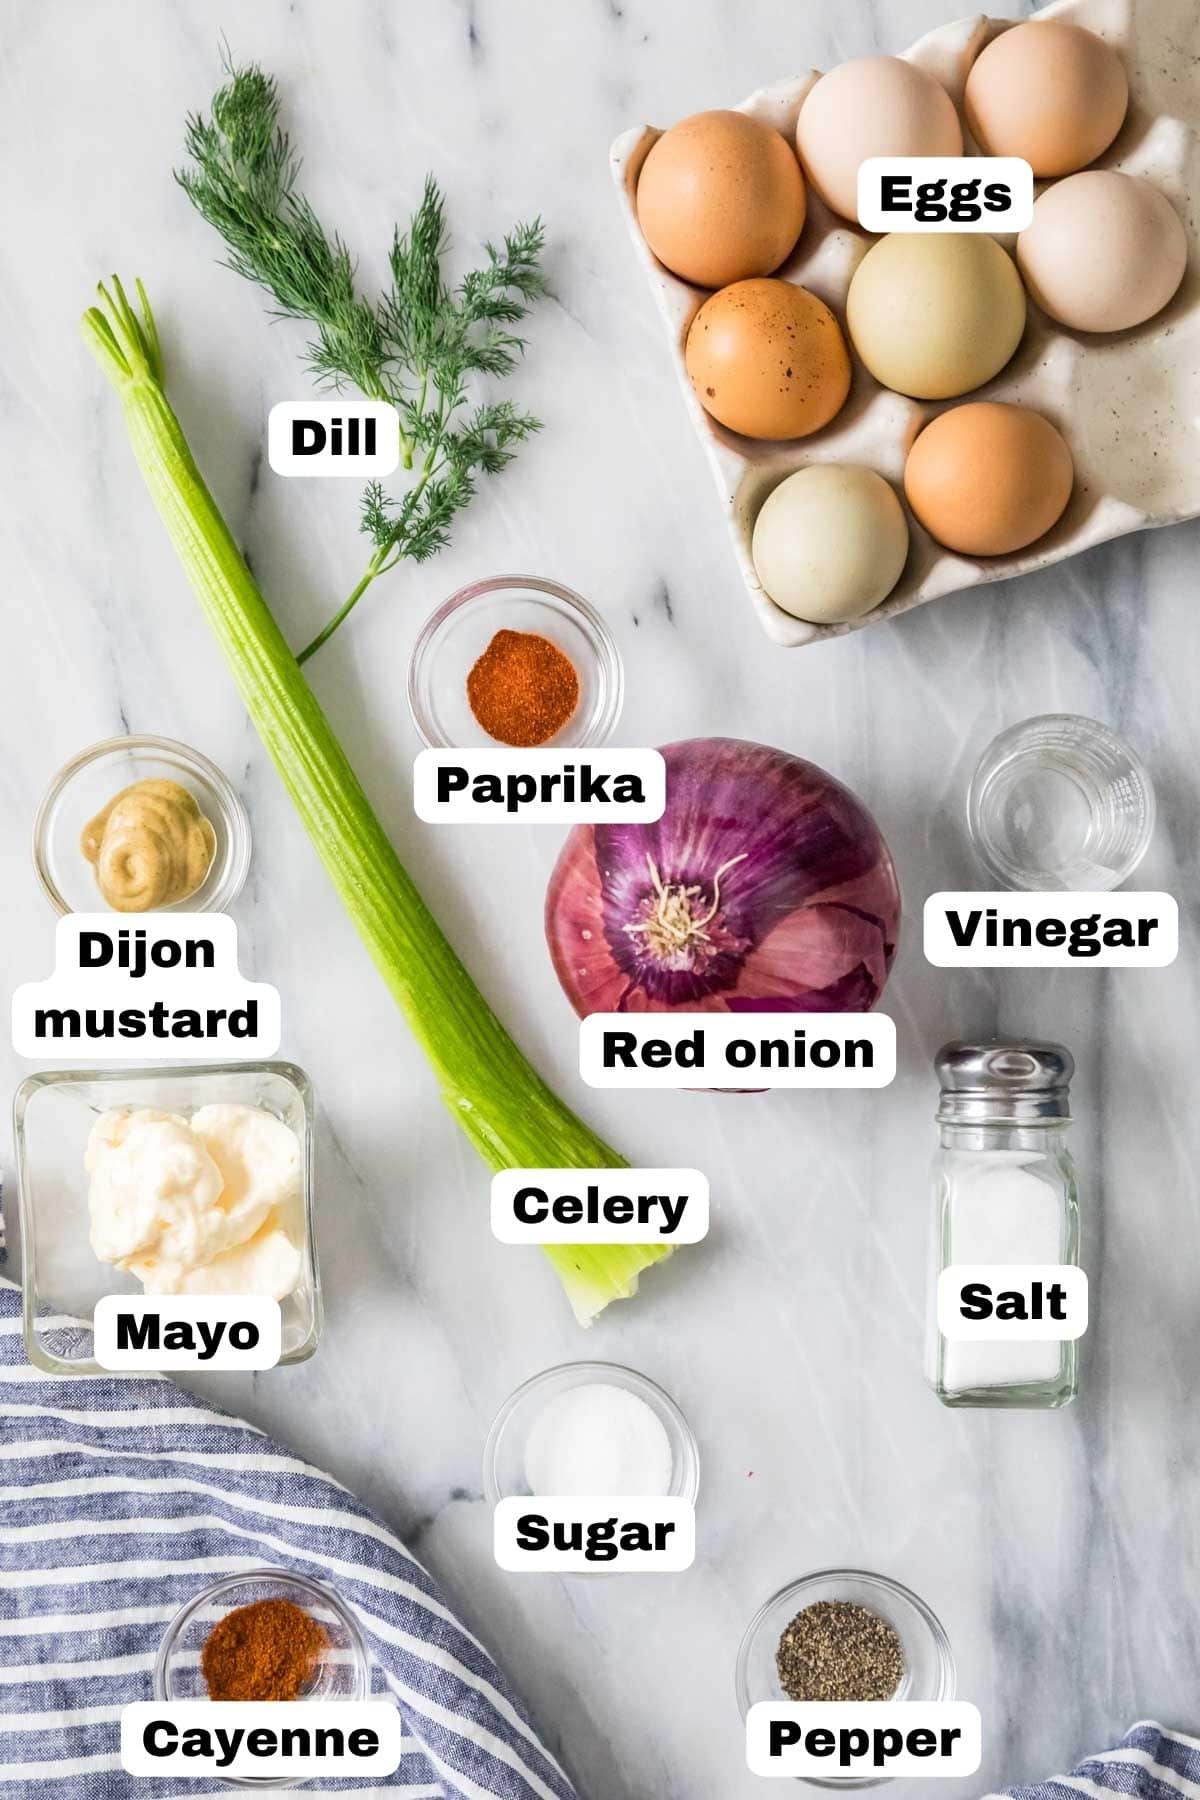 Overhead view of labelled ingredients including eggs, celery, mayo, and more.